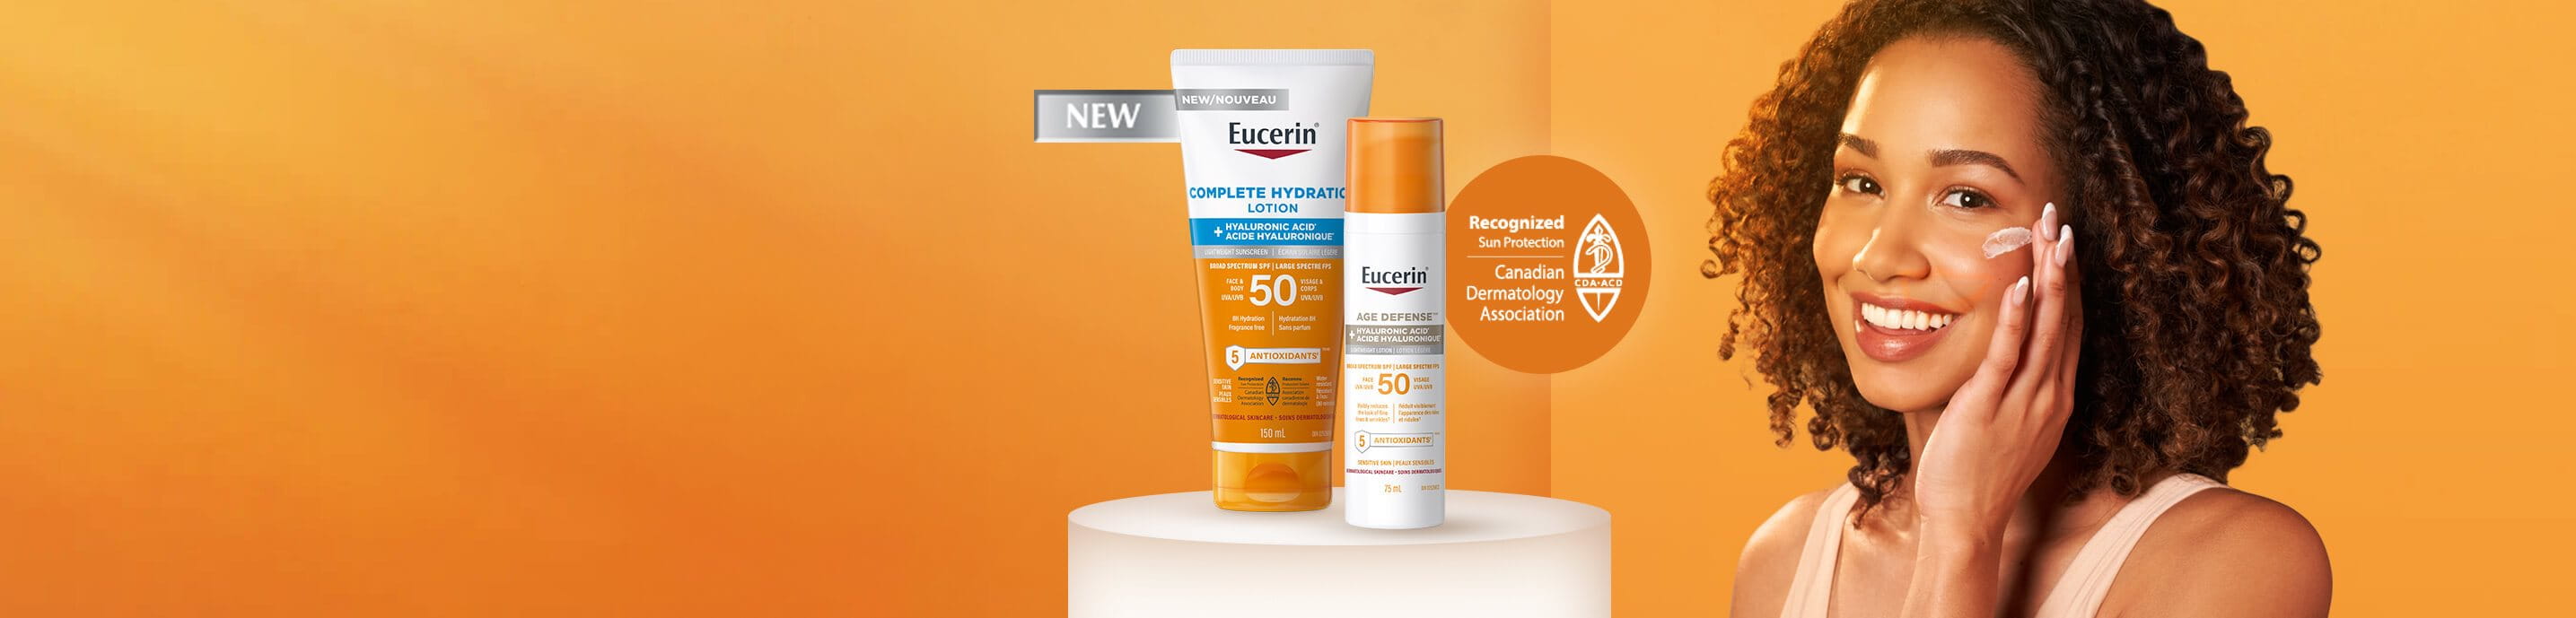 View of a person smiling while applying a Eucerin sunscreen product onto their left cheek, shown against an orange background along with two Eucerin products displayed.